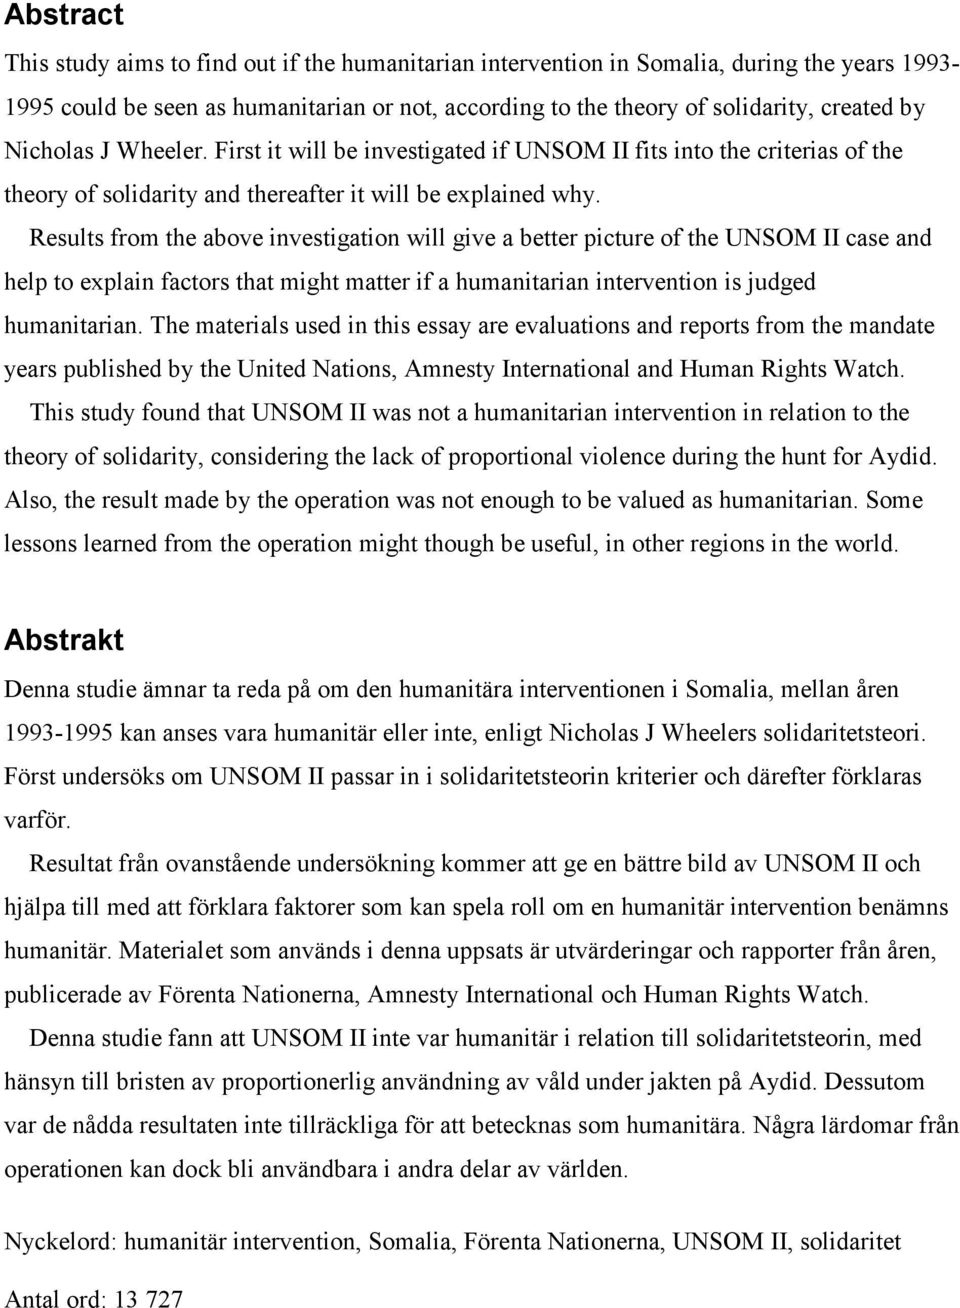 Results from the above investigation will give a better picture of the UNSOM II case and help to explain factors that might matter if a humanitarian intervention is judged humanitarian.